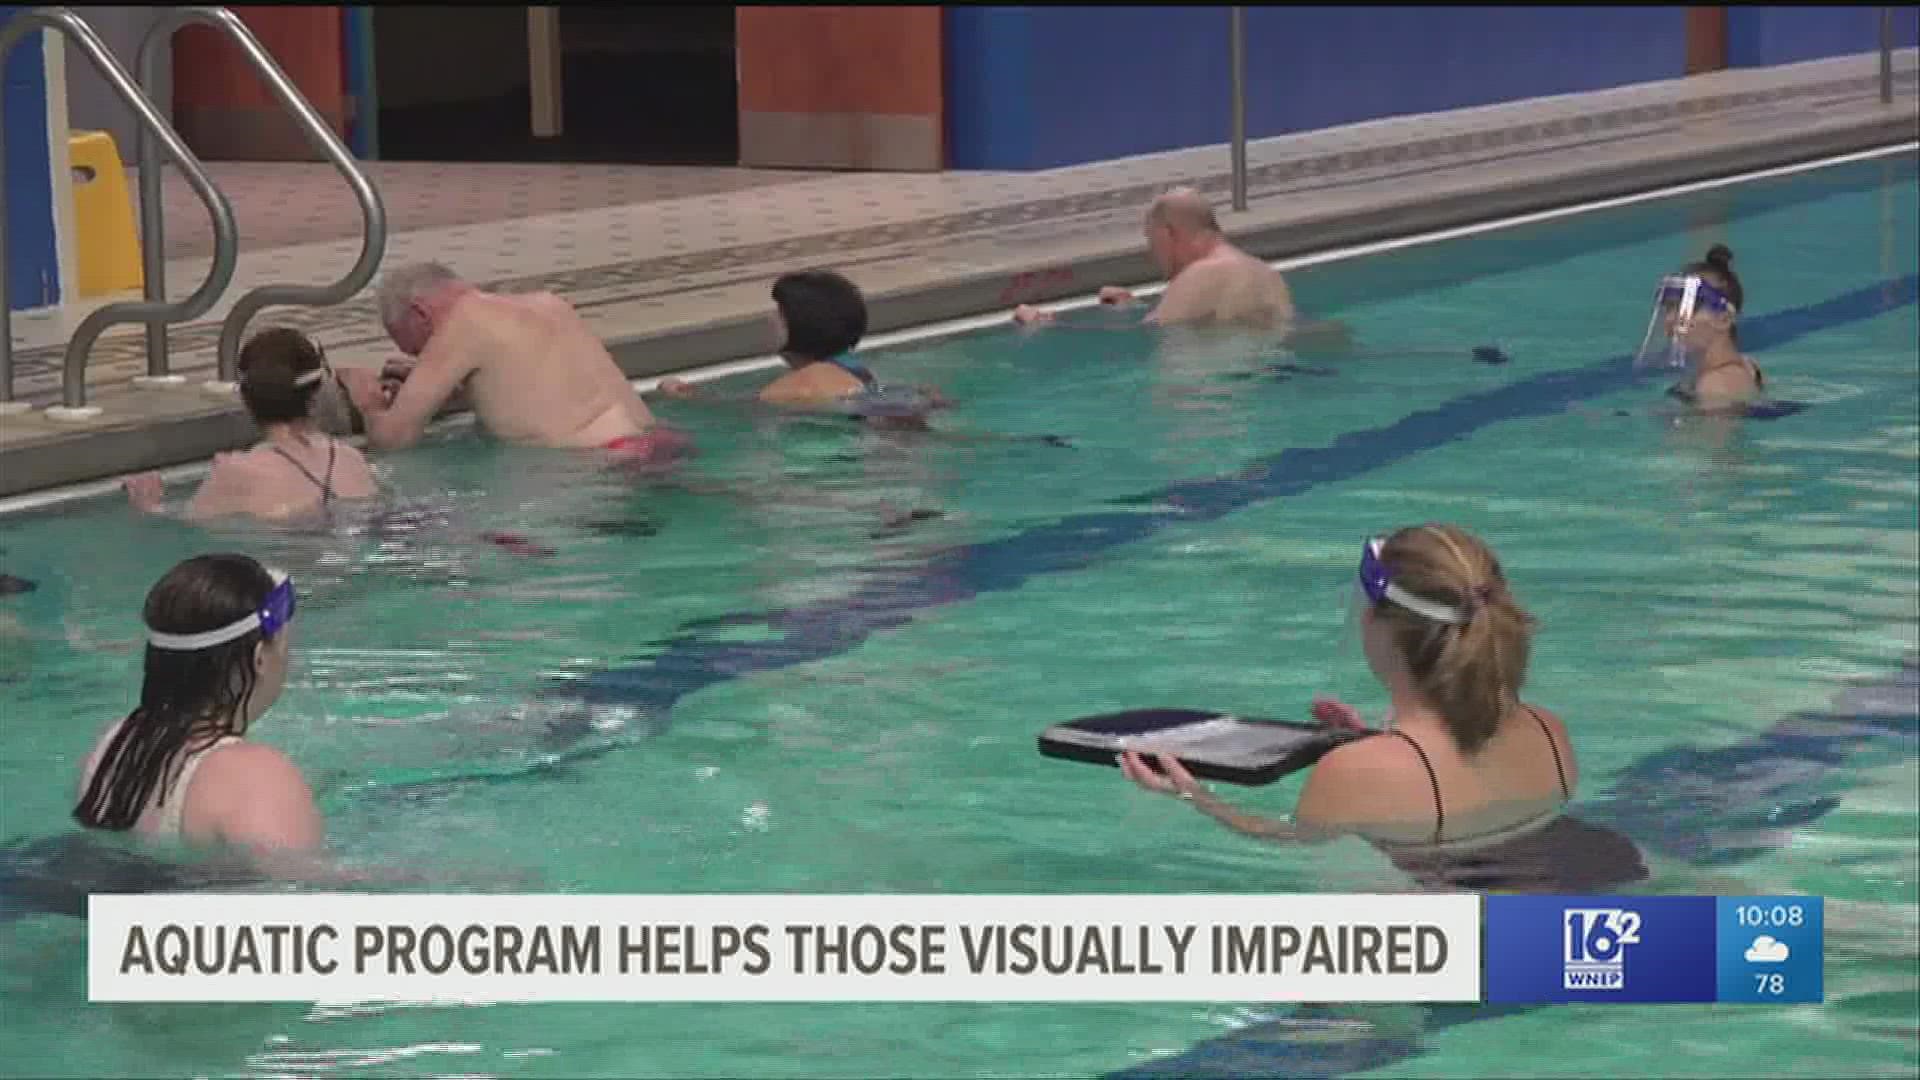 During an eight-week program, Misericordia Physical Therapy students put on a research study to help those who are visually impaired.